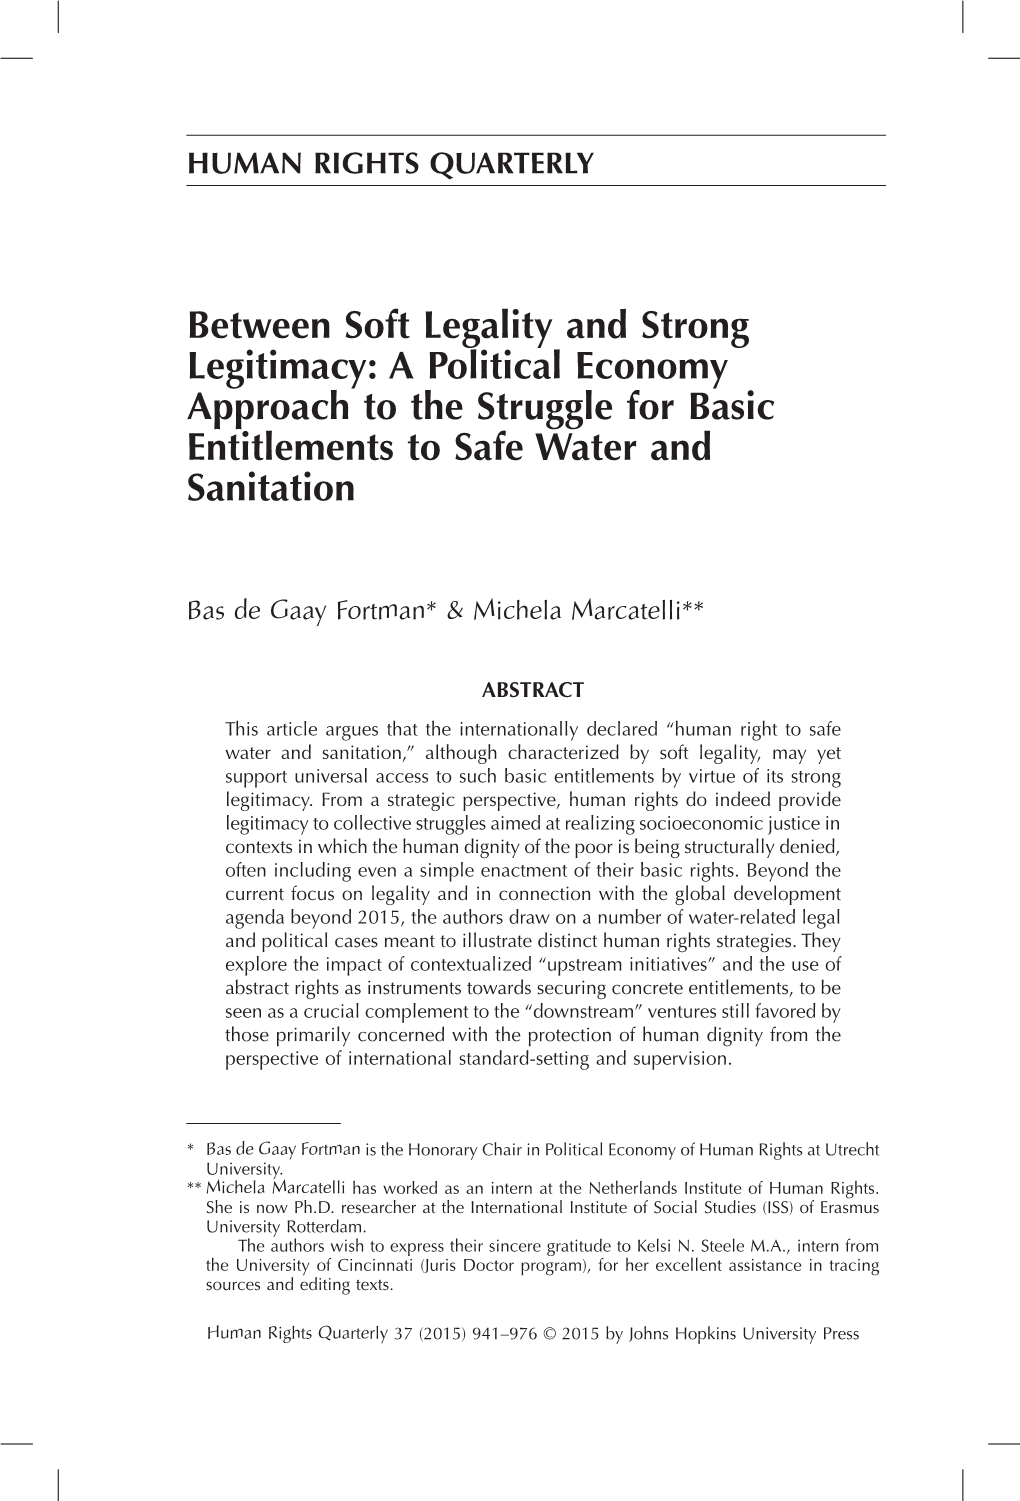 Between Soft Legality and Strong Legitimacy: a Political Economy Approach to the Struggle for Basic Entitlements to Safe Water and Sanitation